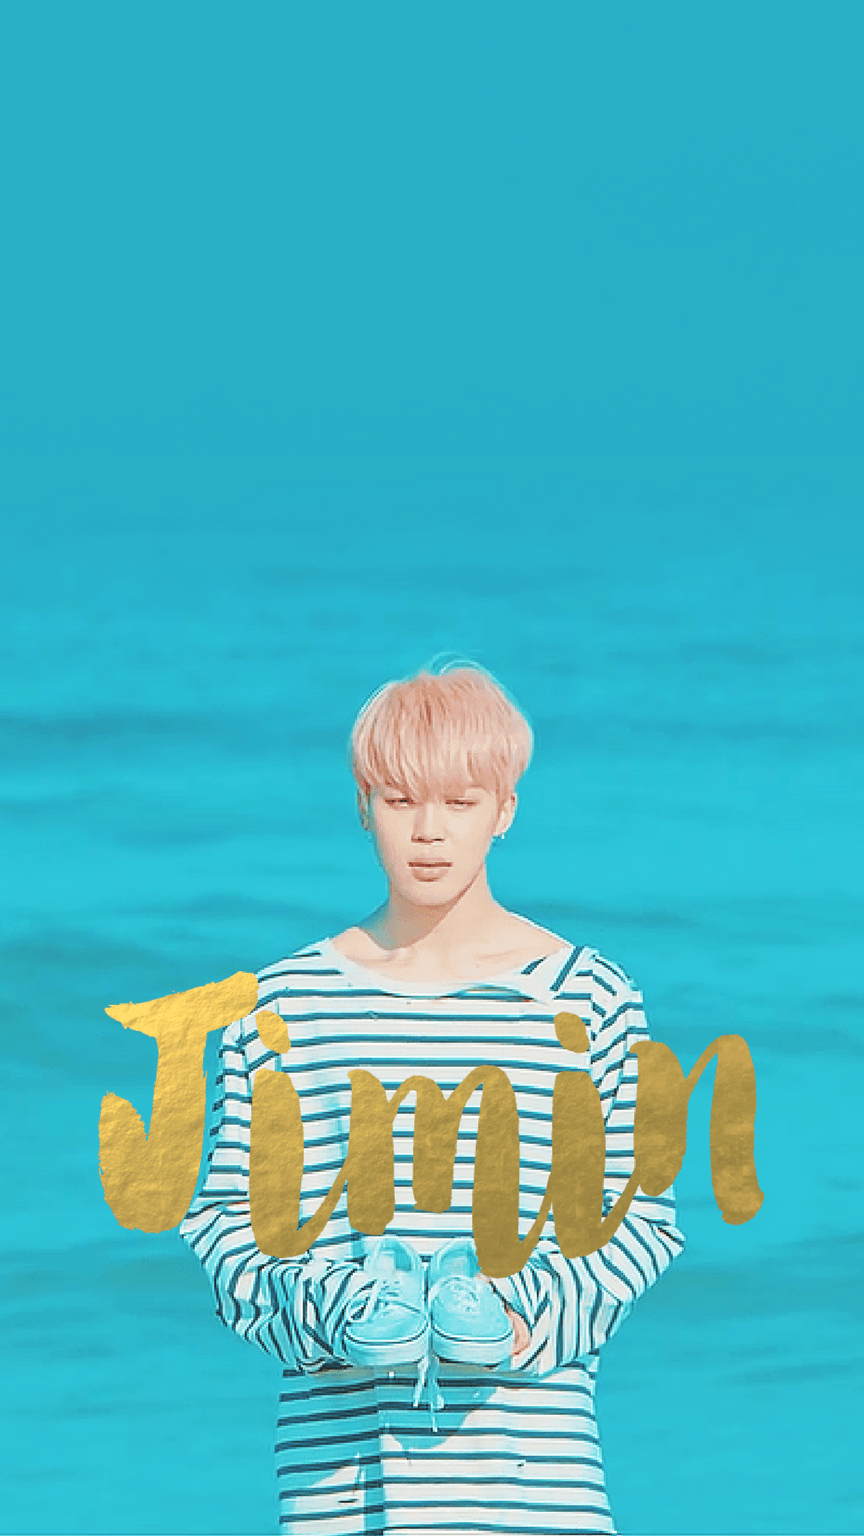 Free download jimin from bts wallpapers top free jimin from bts backgrounds x for your desktop mobile tablet explore jimin wallpapers wallpapers jimin and jungkook wallpapers jimin bts wallpapers